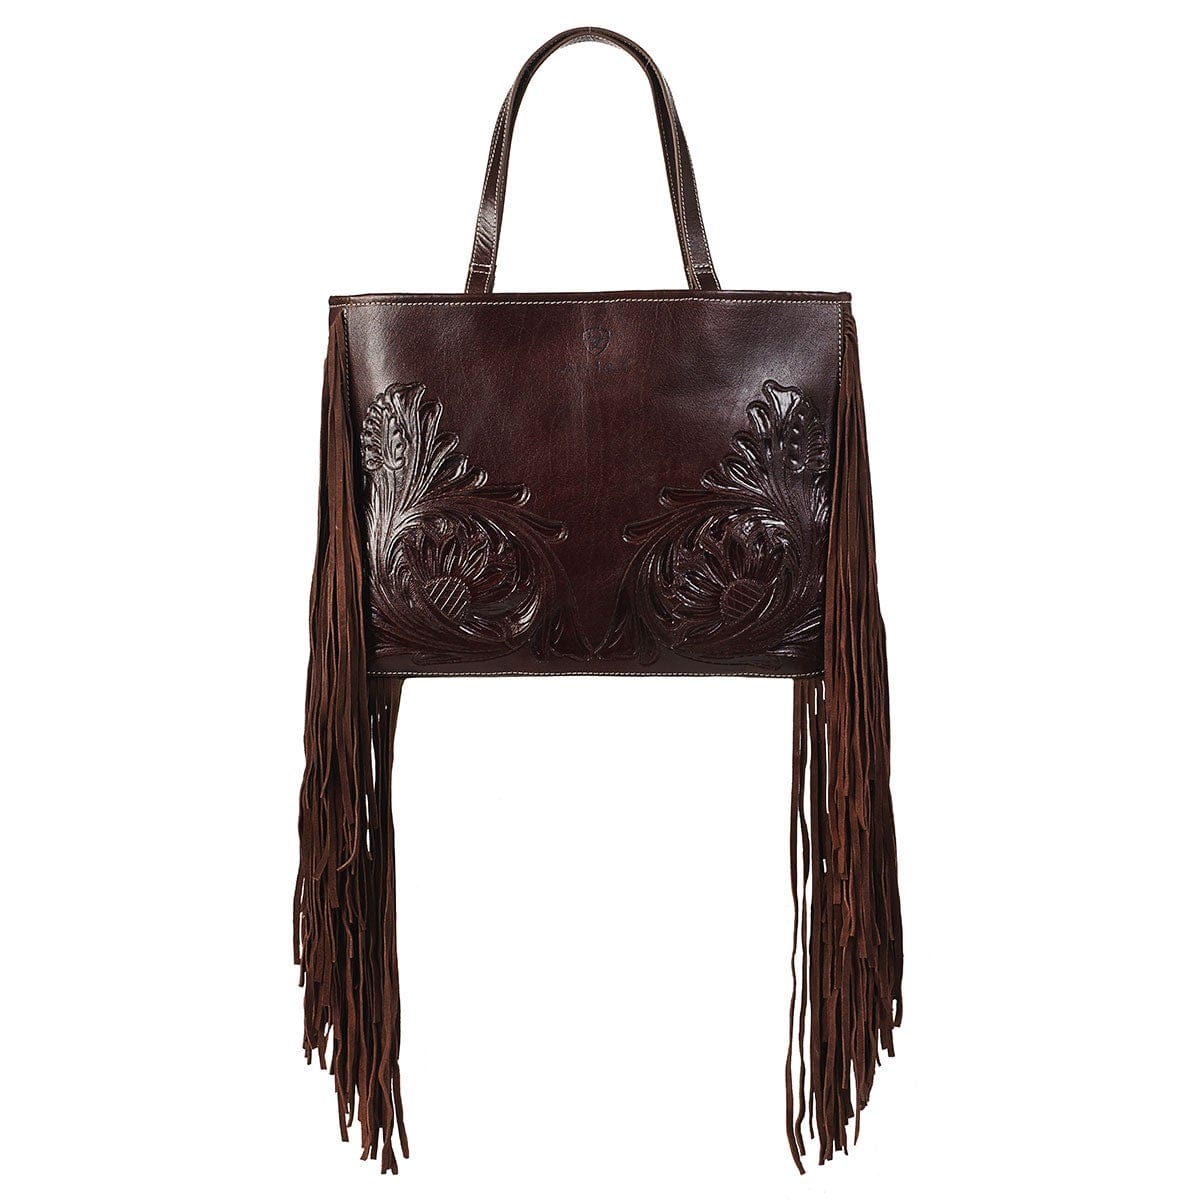 M&F WESTERN Purse Ariat Victoria Brown Tooled Leather Fringe Tote Bag A770009302